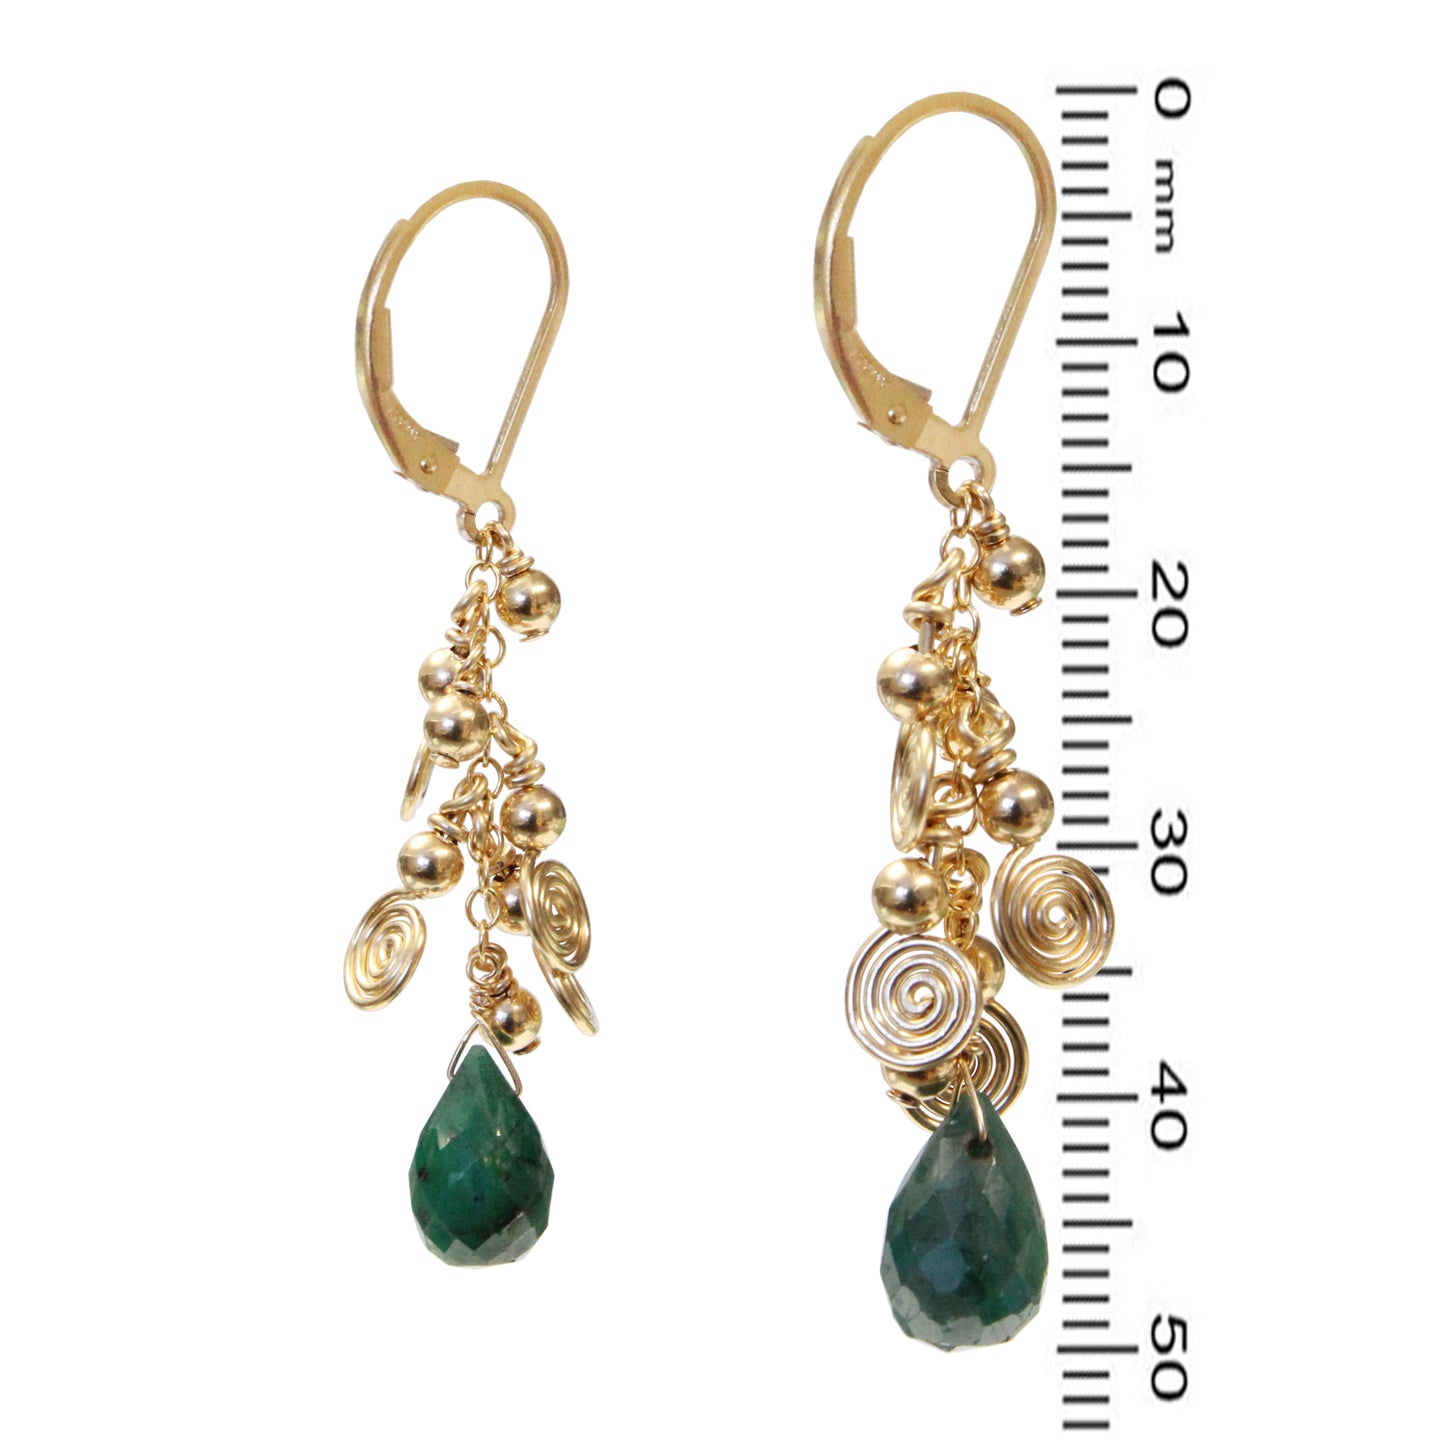 Emerald Cascade Earrings with galaxy spirals / 50mm length / gold filled leverback earwires